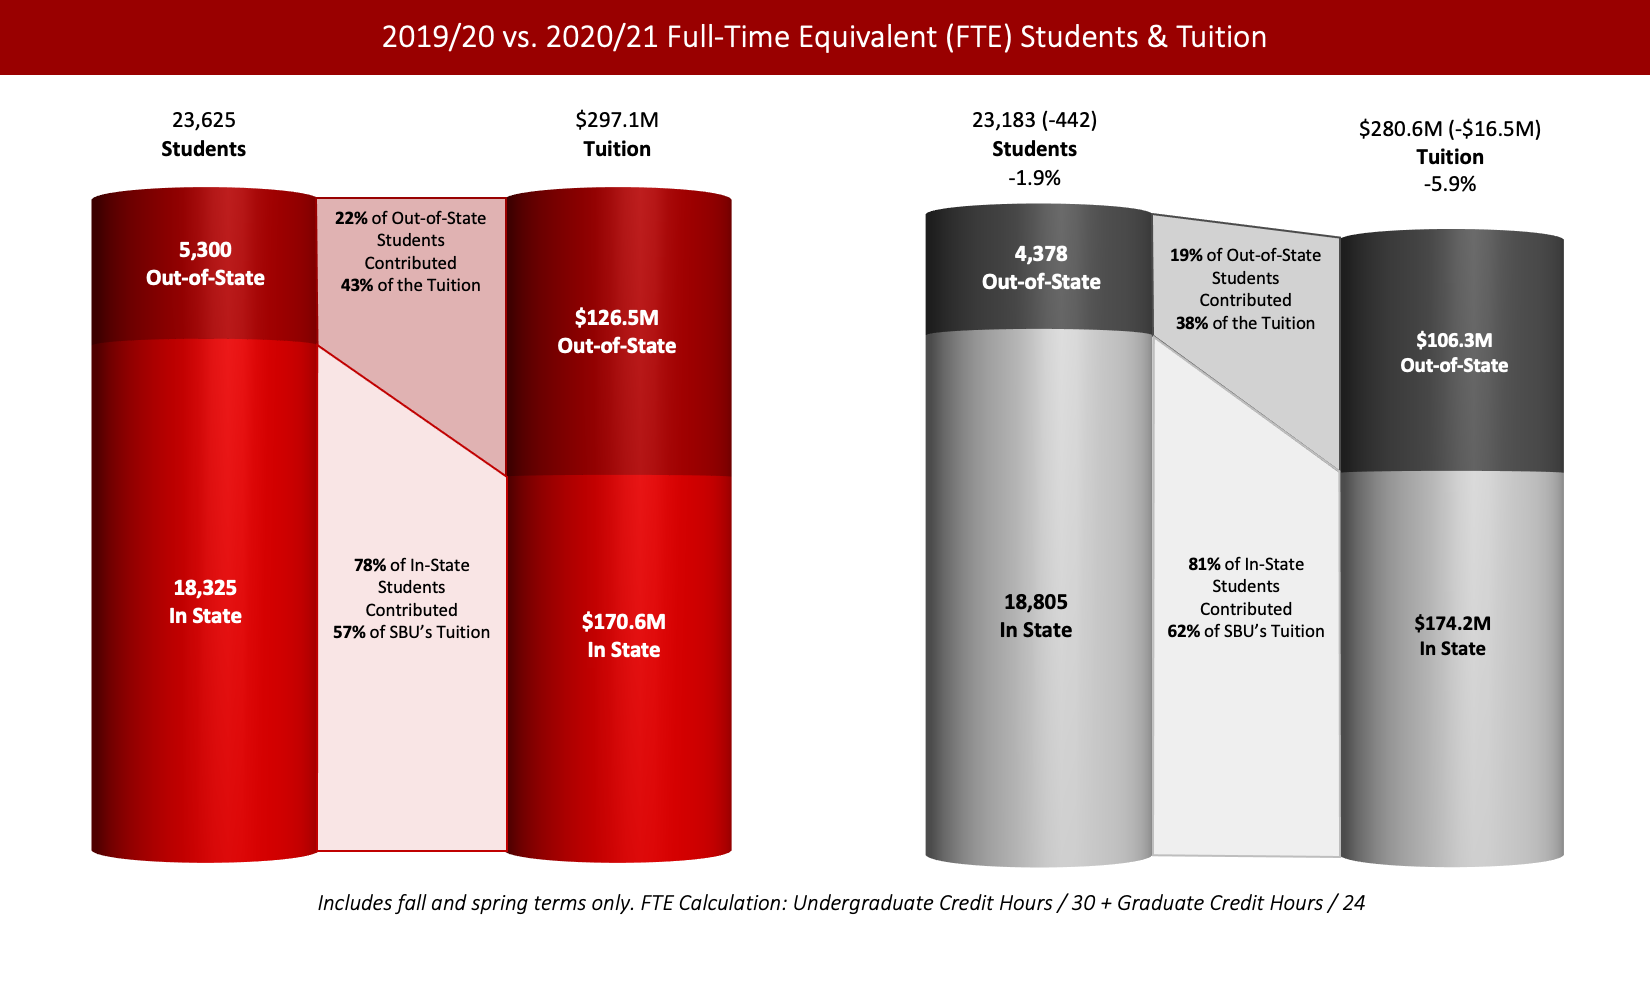 Left Chart: 2019/20 Full-Time Equivalent (FTE) Students & Tuition  Students: 5,300 out-of-state, 18,325 in-state; 23,625 total FTE Students.  Tuition: $126.5 million out-of-state, $170.6 million in state; $297.1 million total tuition.  22% of Out-of-State Students Contributed  43% of SBU's Tuition.  78% of In-State Students Contributed  57% of SBU’s Tuition. Right Chart: 2020/21 Full-Time Equivalent (FTE) Students & Tuition  Students: 4,275 out-of-state, 19,325 in-state; 23,183 total FTE Students.  Tuition: $108.1 million out-of-state, $176.7 million in state; $284.8 million total tuition.   18% of Out-of-State Students Contributed  38% of the Tuition  82% of In-State Students Contributed  62% of SBU’s Tuition  Footnote reads: Includes fall and spring terms only. FTE Calculation: Undergraduate Credit Hours / 30 + Graduate Credit Hours / 24